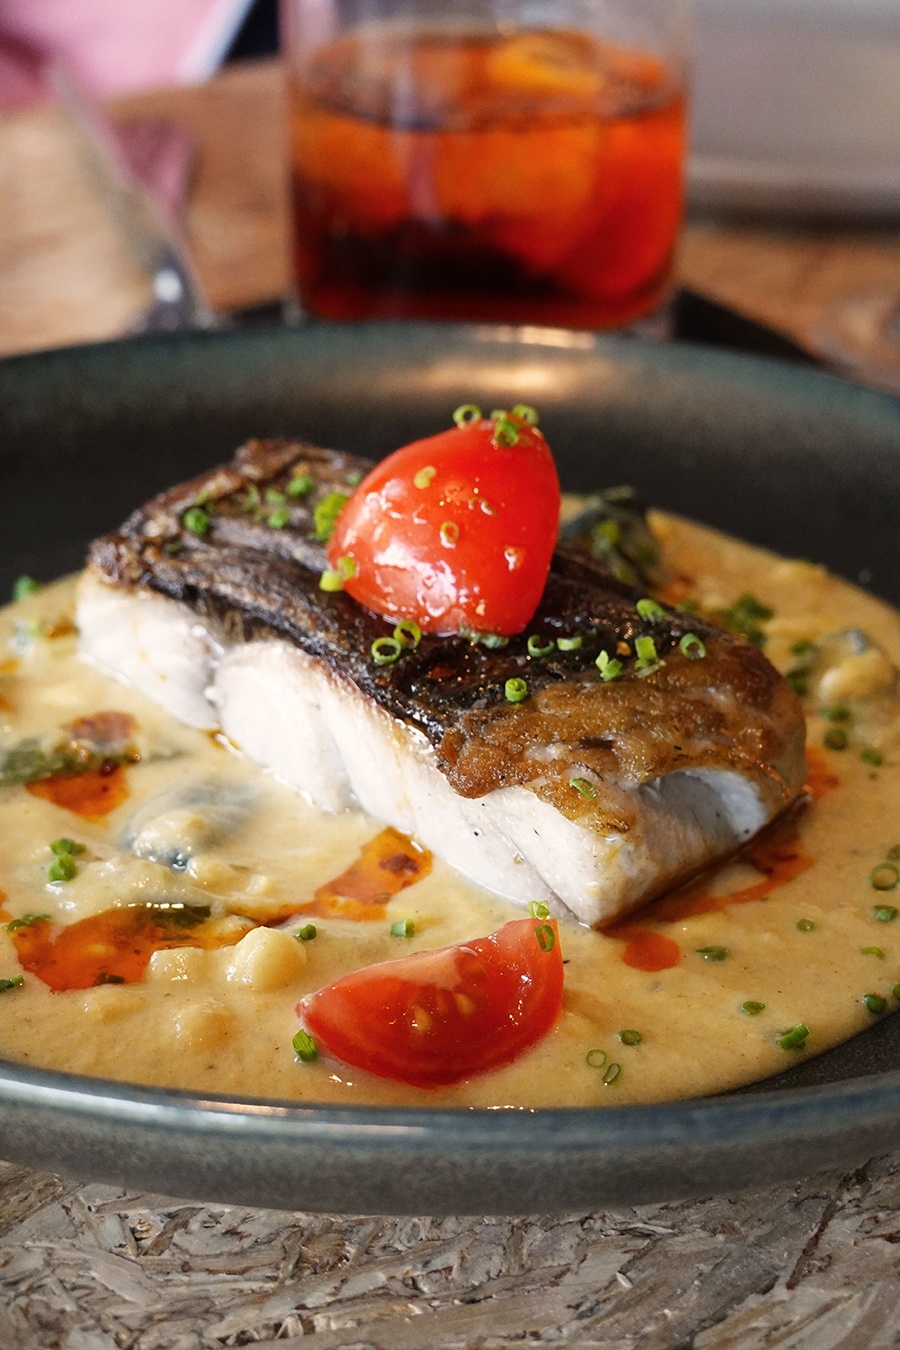 A thick filet of white fish with crispy skin is topped with chives and tomato and sits in a pool of pale yellow puree.